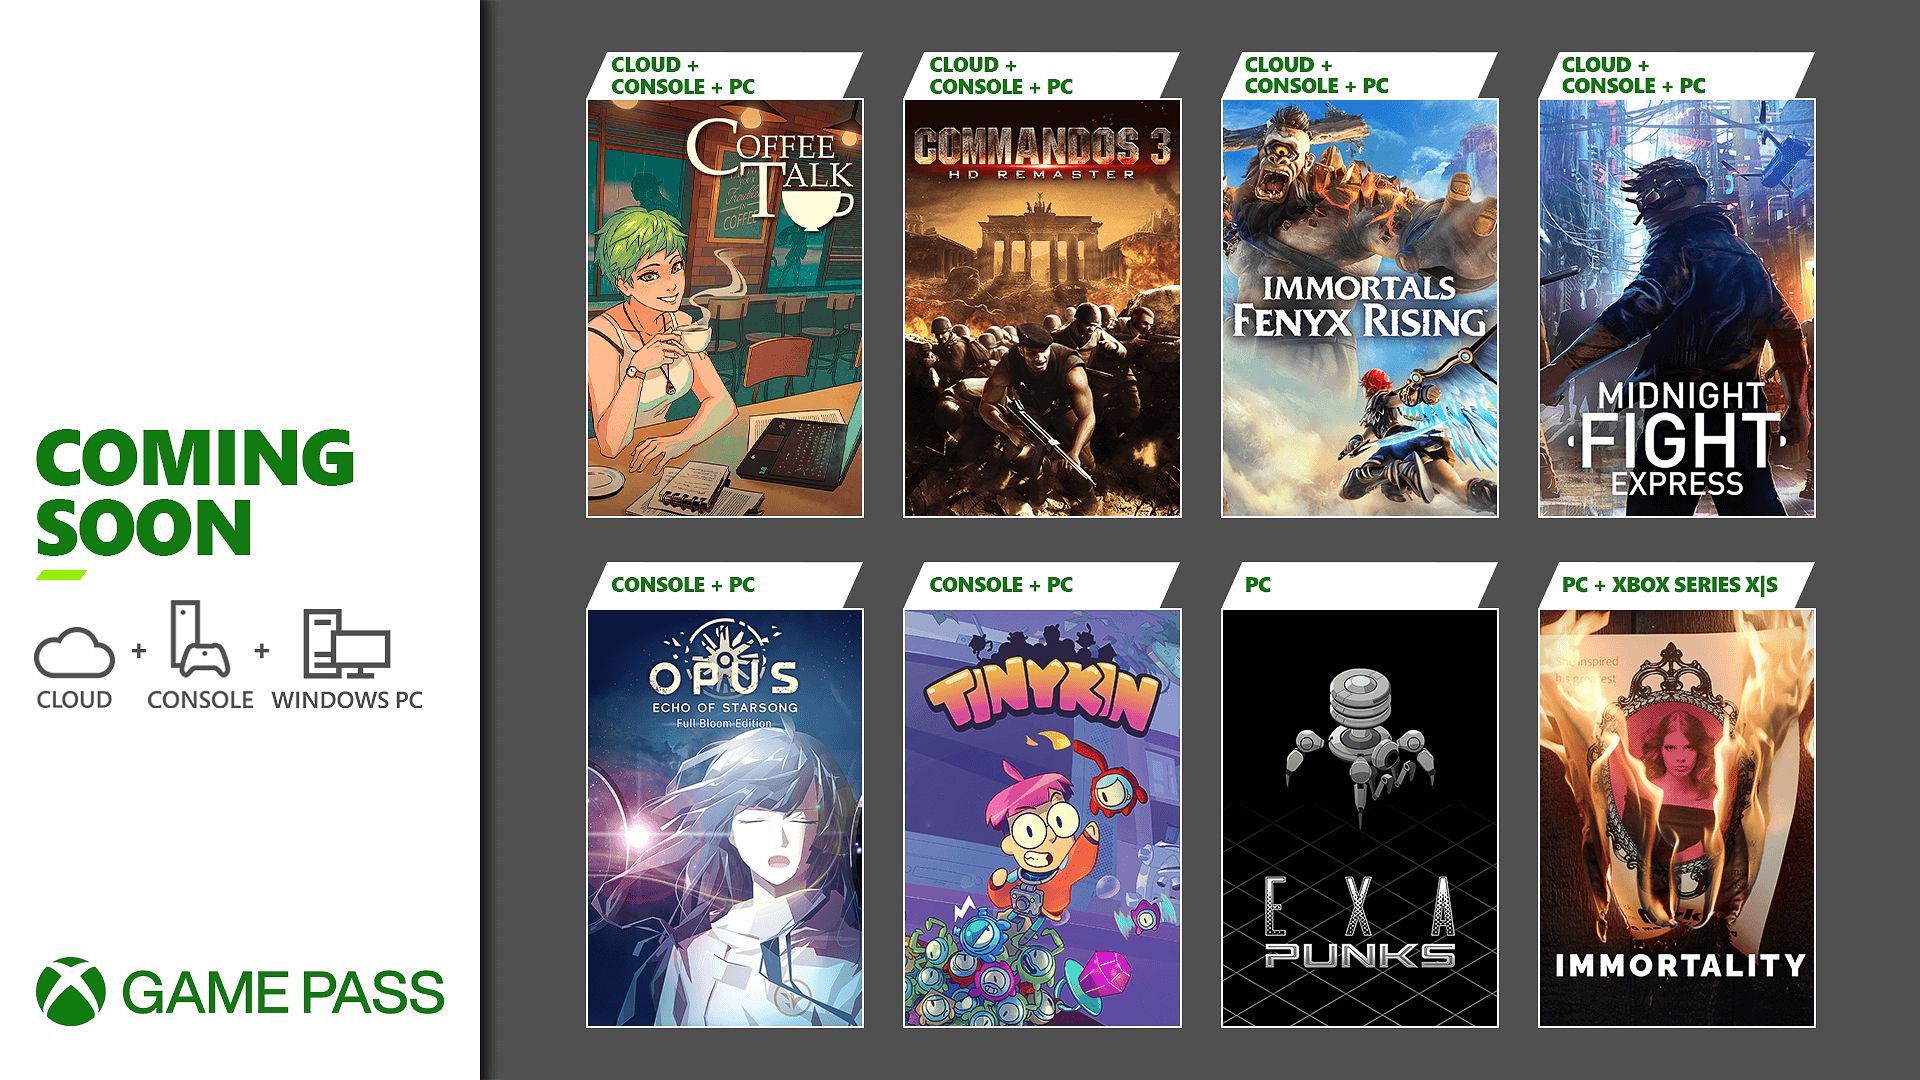 #
      Xbox Game Pass adds OPUS: Echo of Starsong- Full Bloom Edition, Tinykin, IMMORTALITY, and more in late August